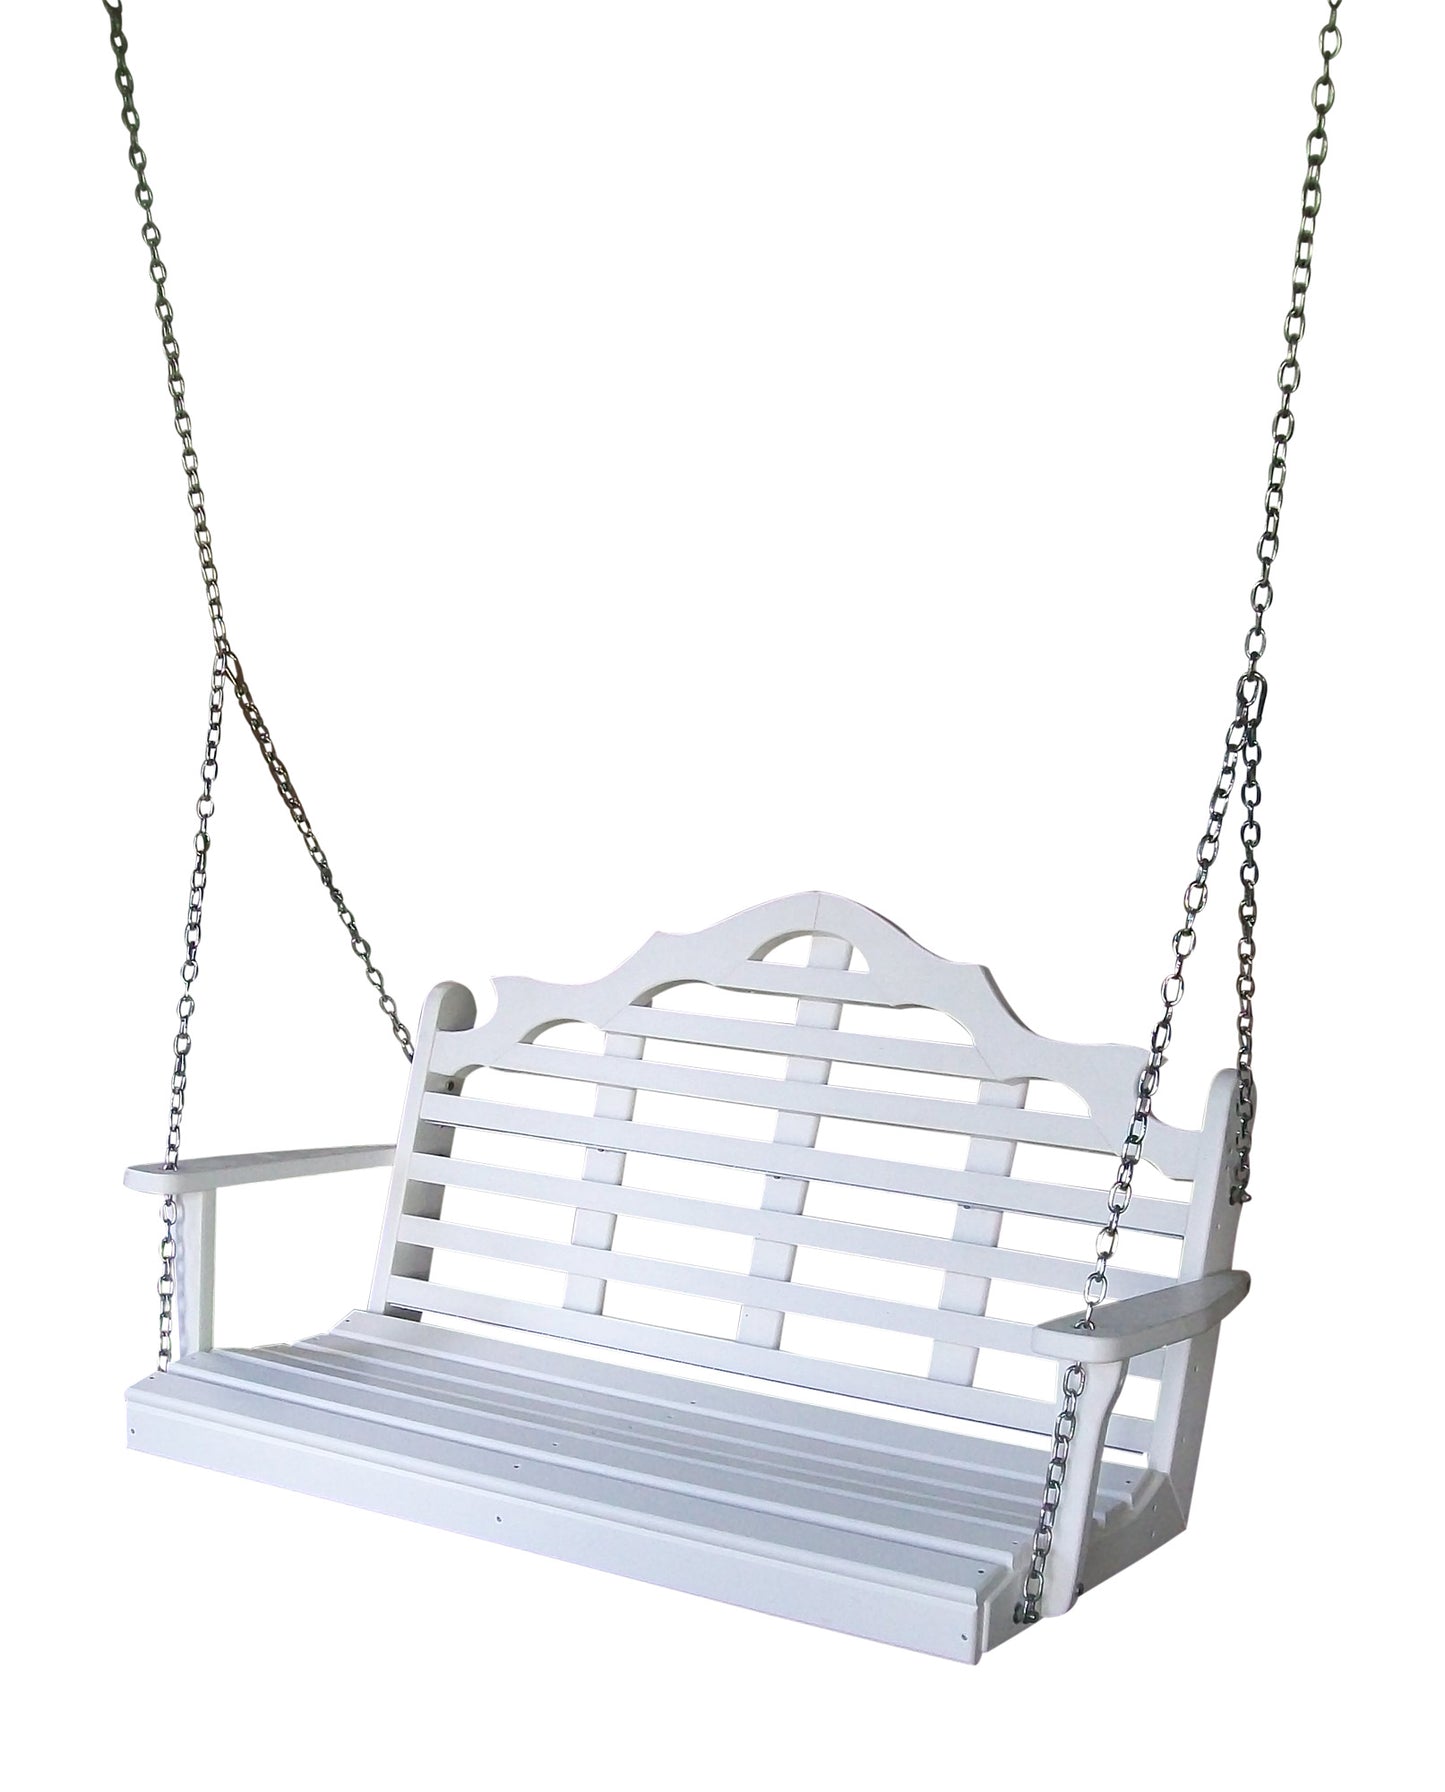 A&L Furniture Company Marlboro Recycled Plastic 4ft Porch Swing - LEAD TIME TO SHIP 10 BUSINESS DAYS